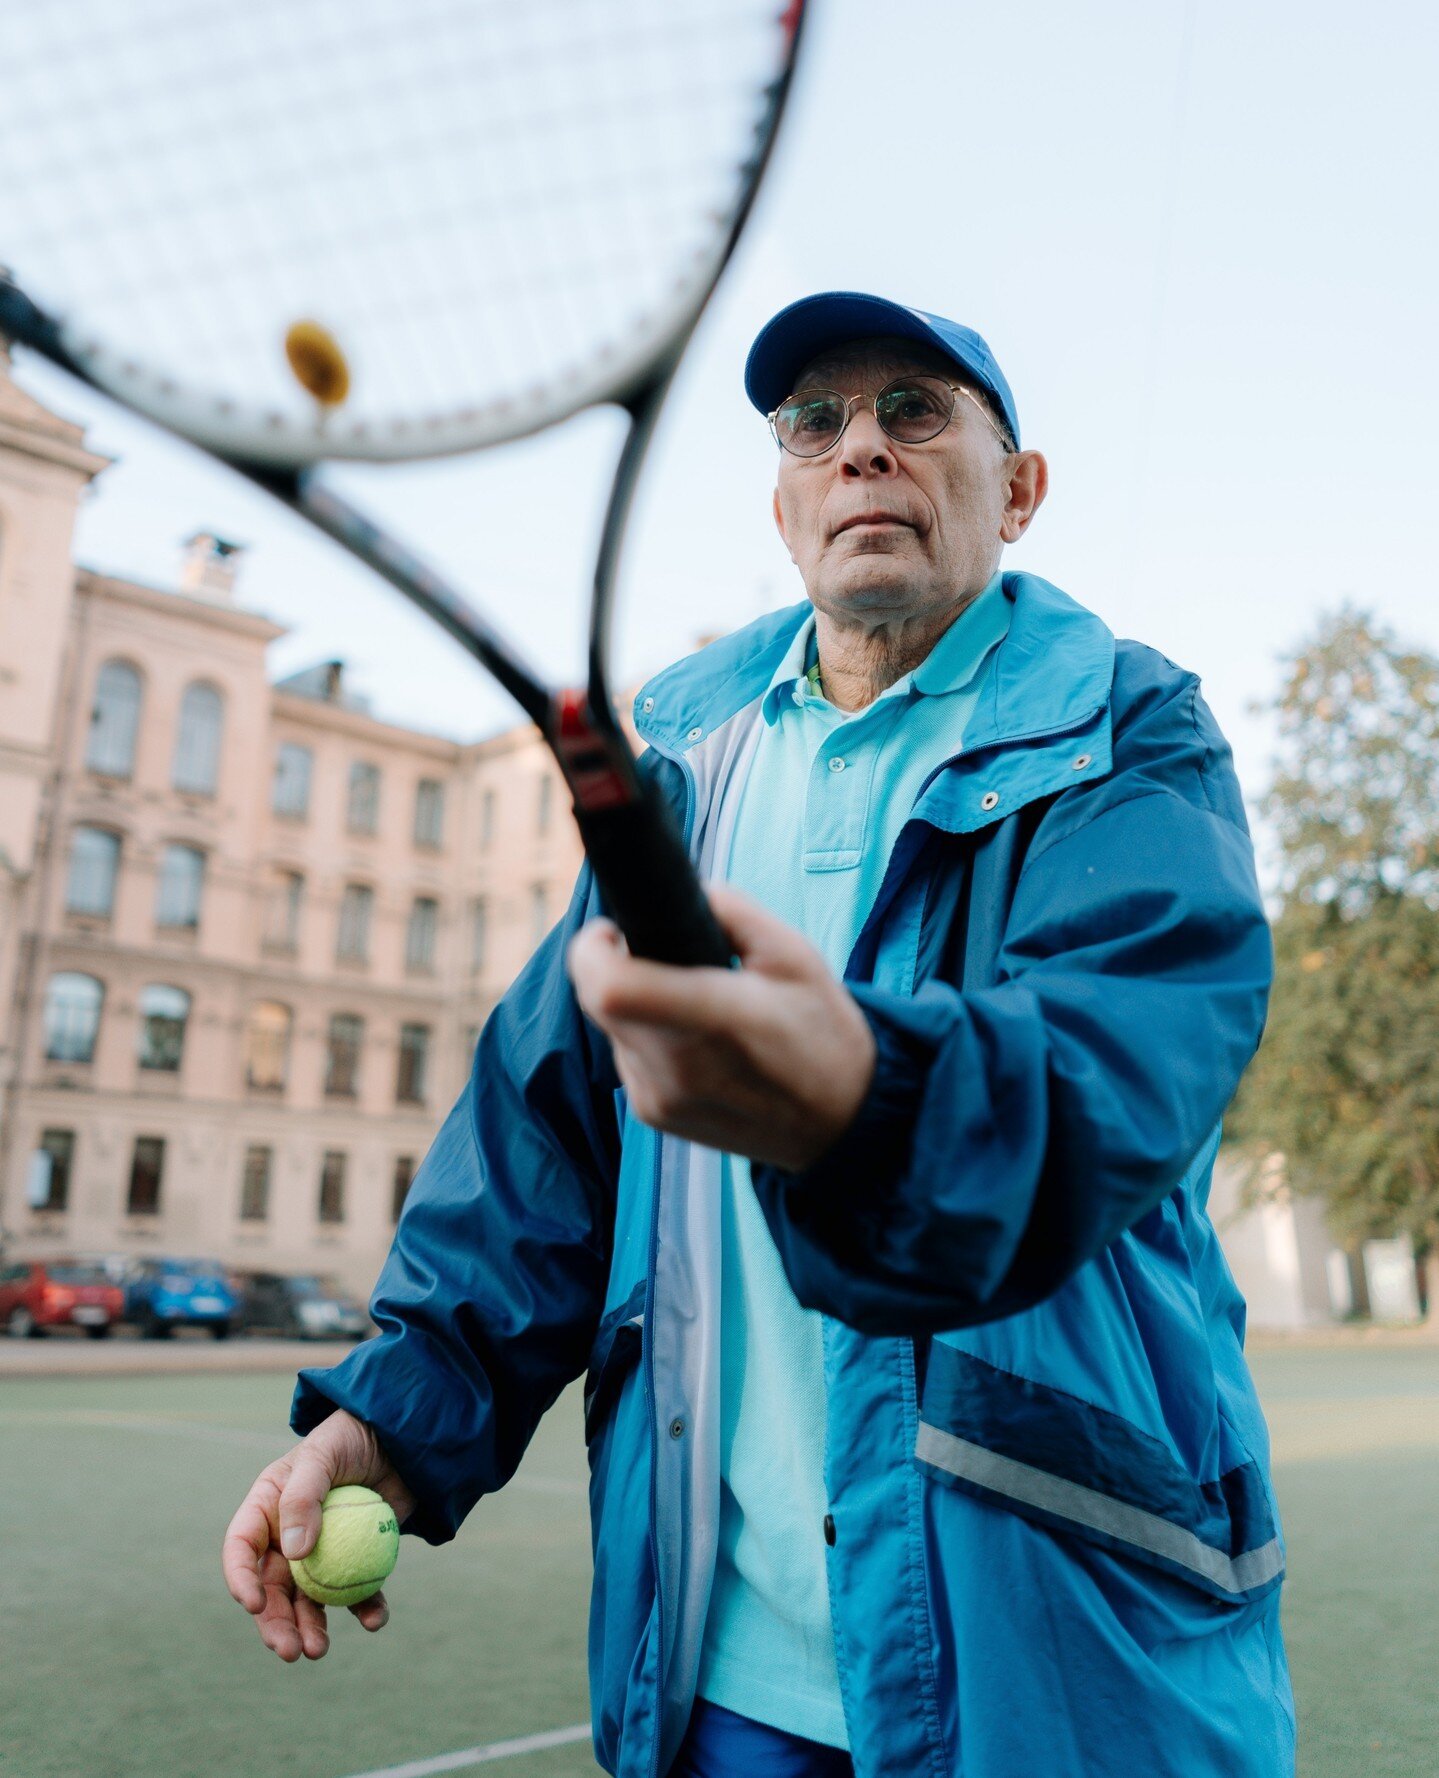 Physical activity is important for everyone, but it is especially important to keep up with exercise during our later stages of life. ⁠
⁠
It can not only improve your health but also reduce the risk of heart disease and stroke. The NHS recommends 'th